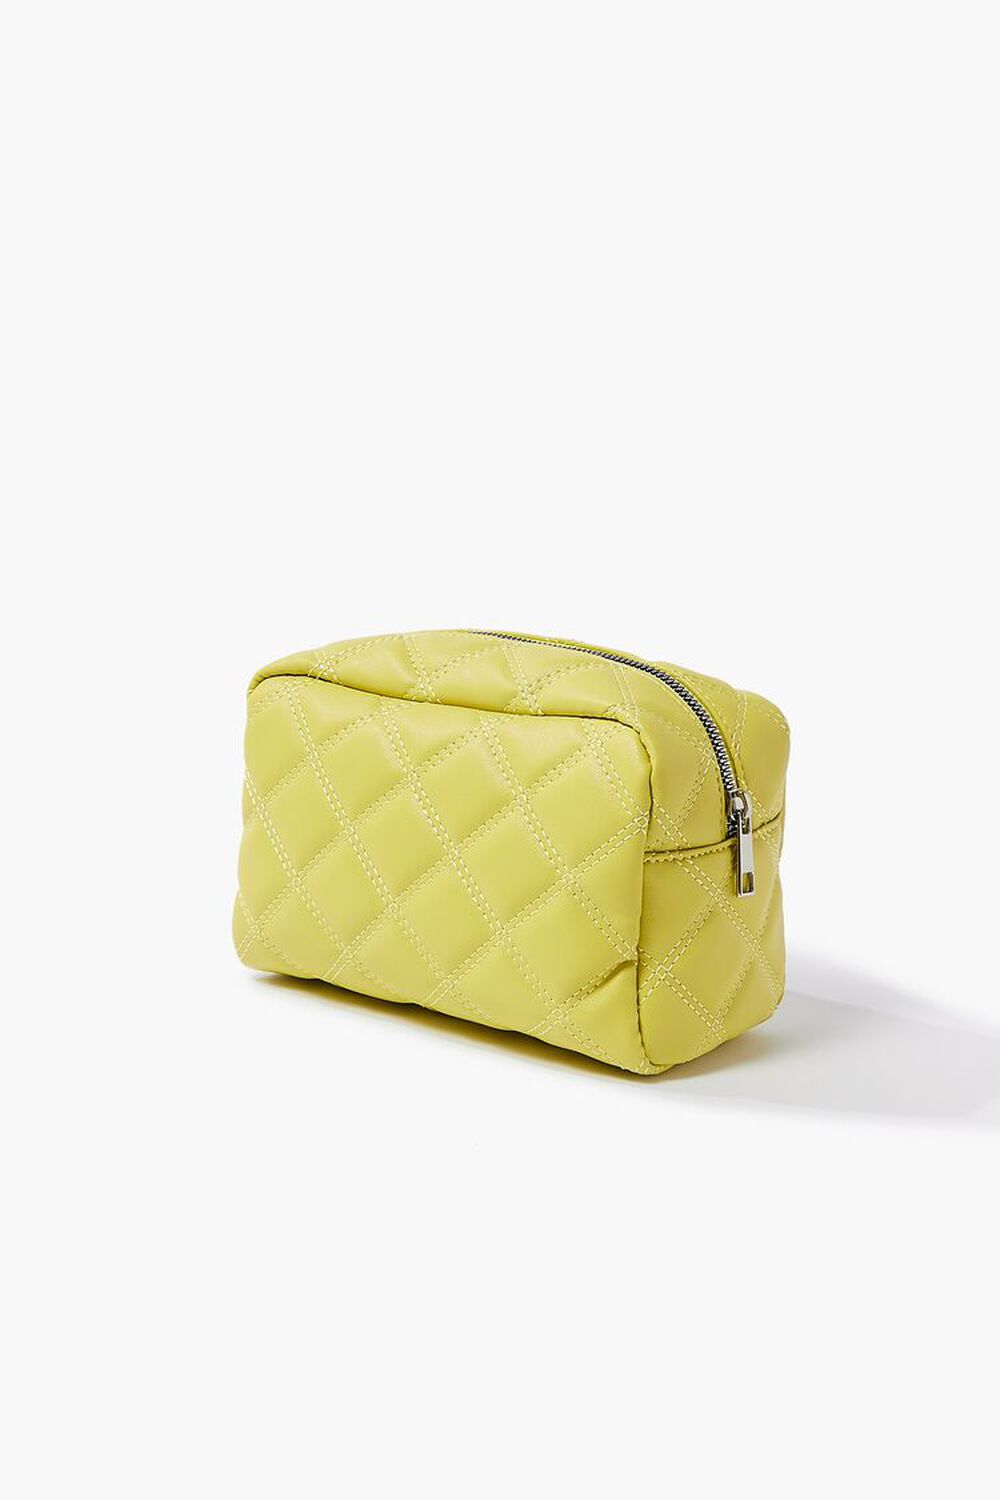 CELERY Quilted Faux Leather Makeup Bag, image 1